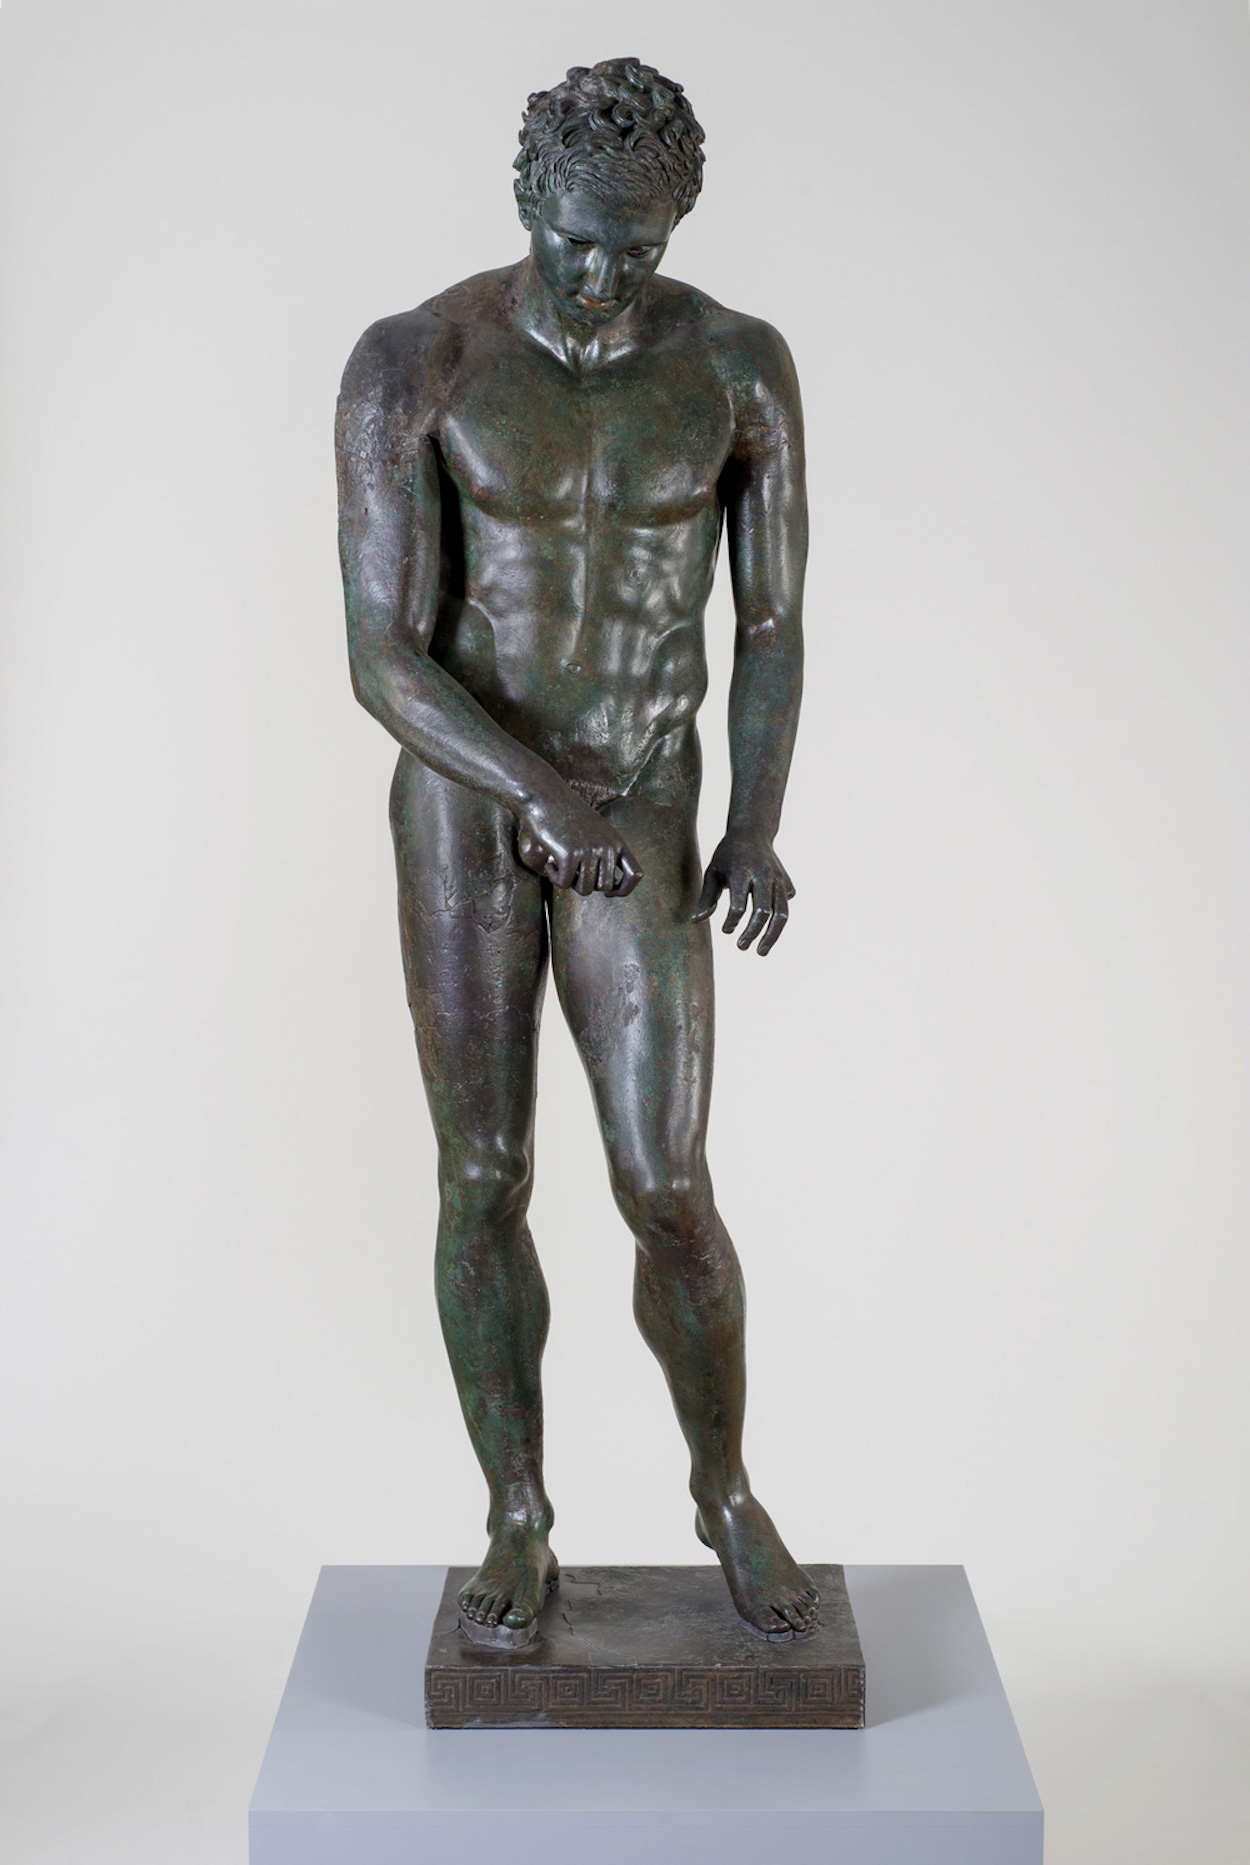 Apoxyomenos by Artiste Inconnu - 2nd or 1st century BC 